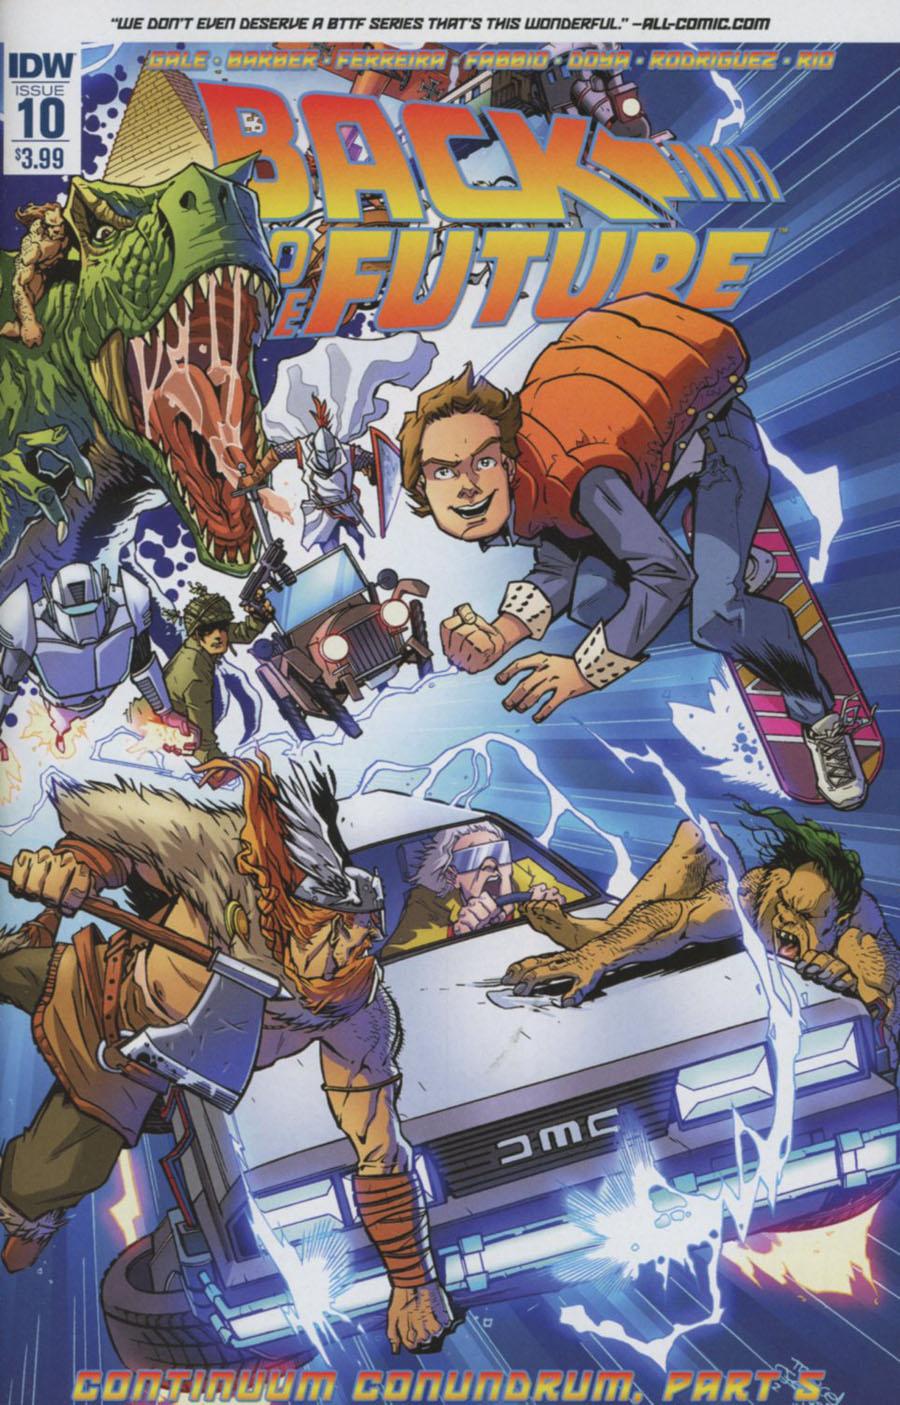 Back To The Future Vol. 2 #10